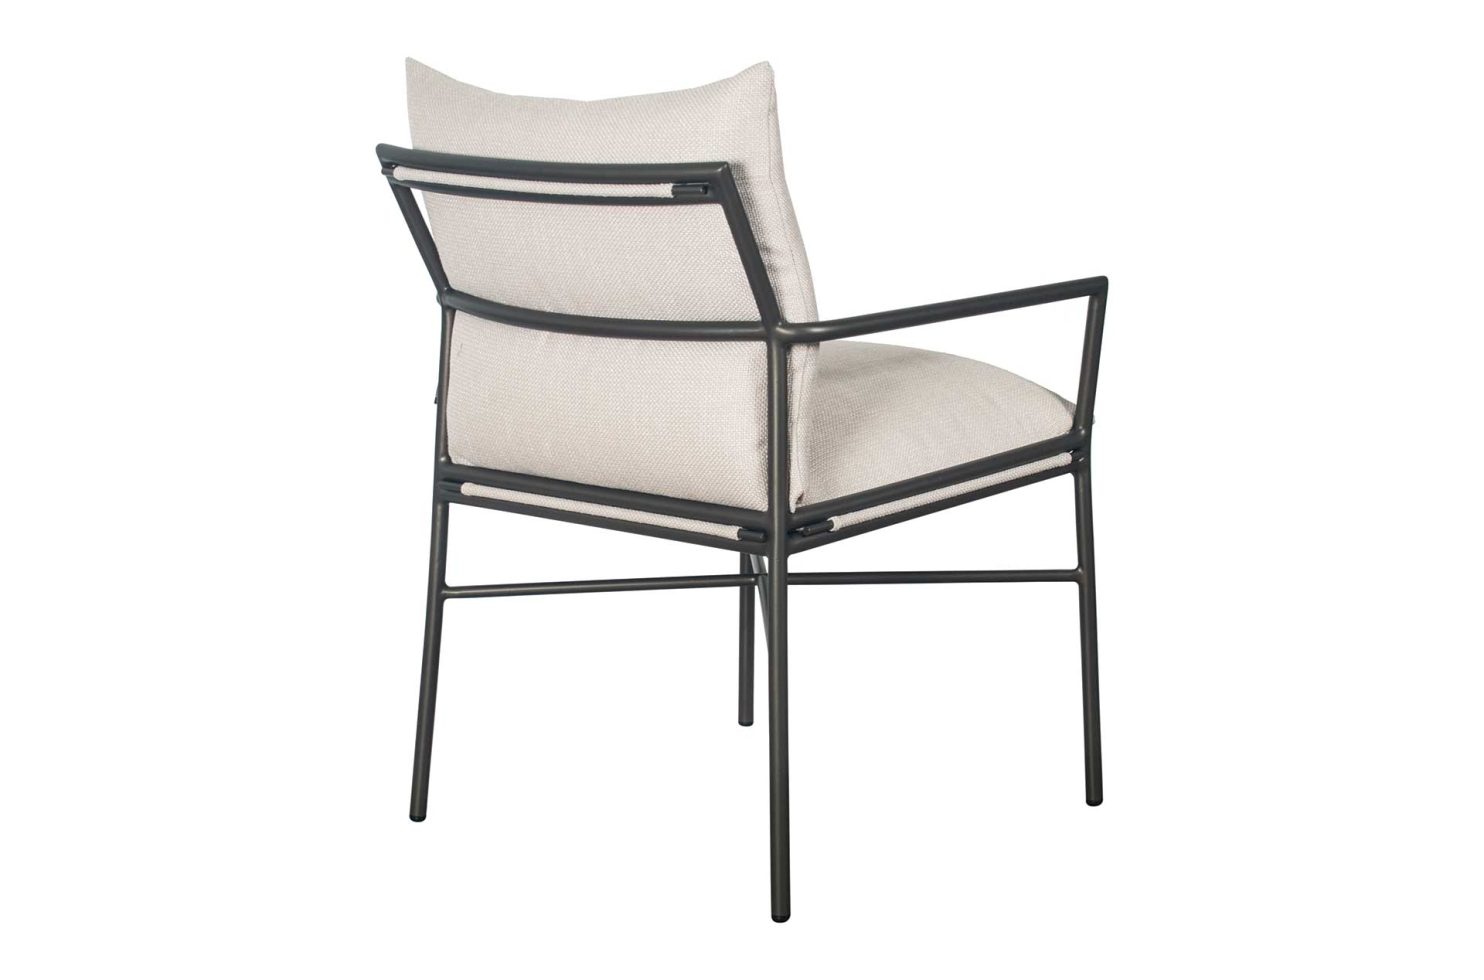 arch hebrides dining chair A620230004 1 3Q back web